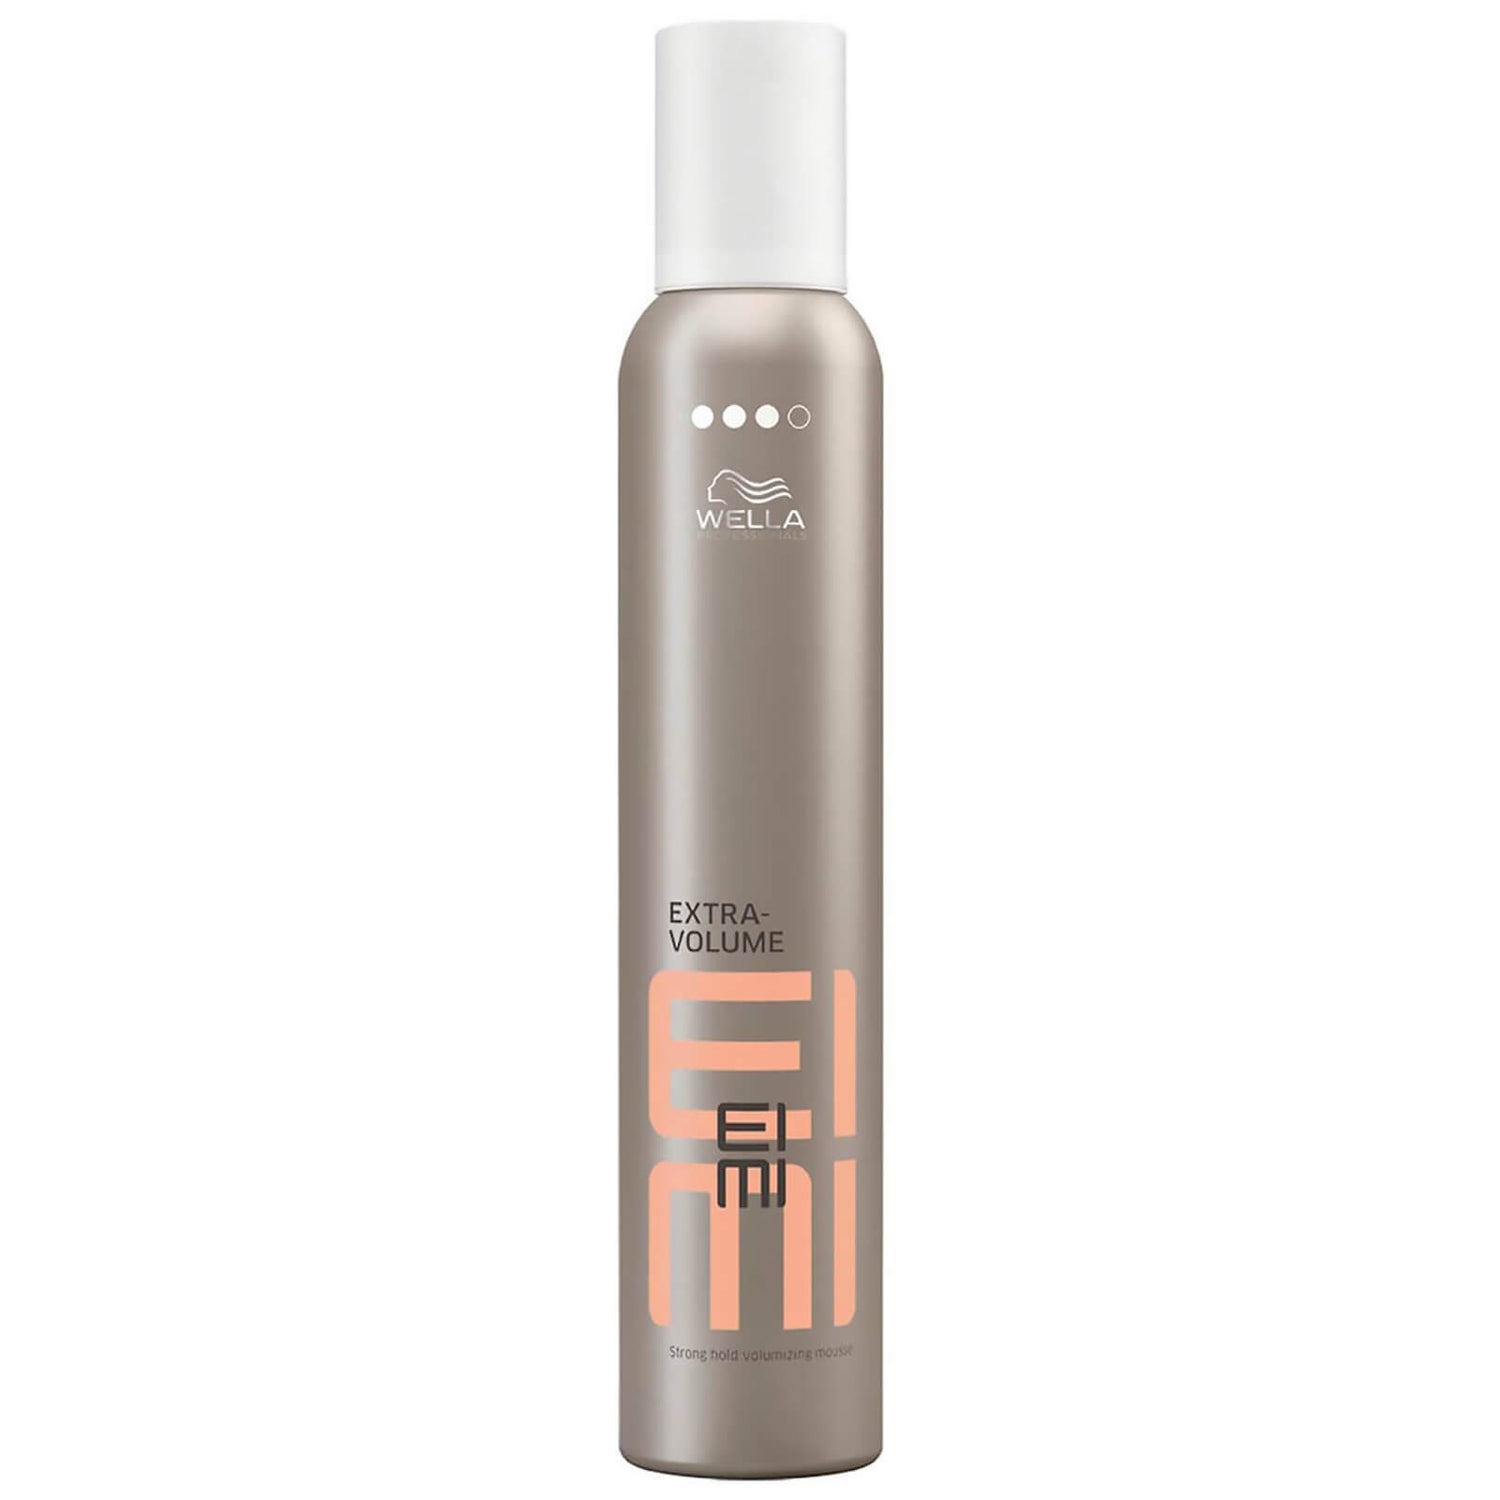 Wella Professionals Wet Extra Volume Styling Mousse 300ml